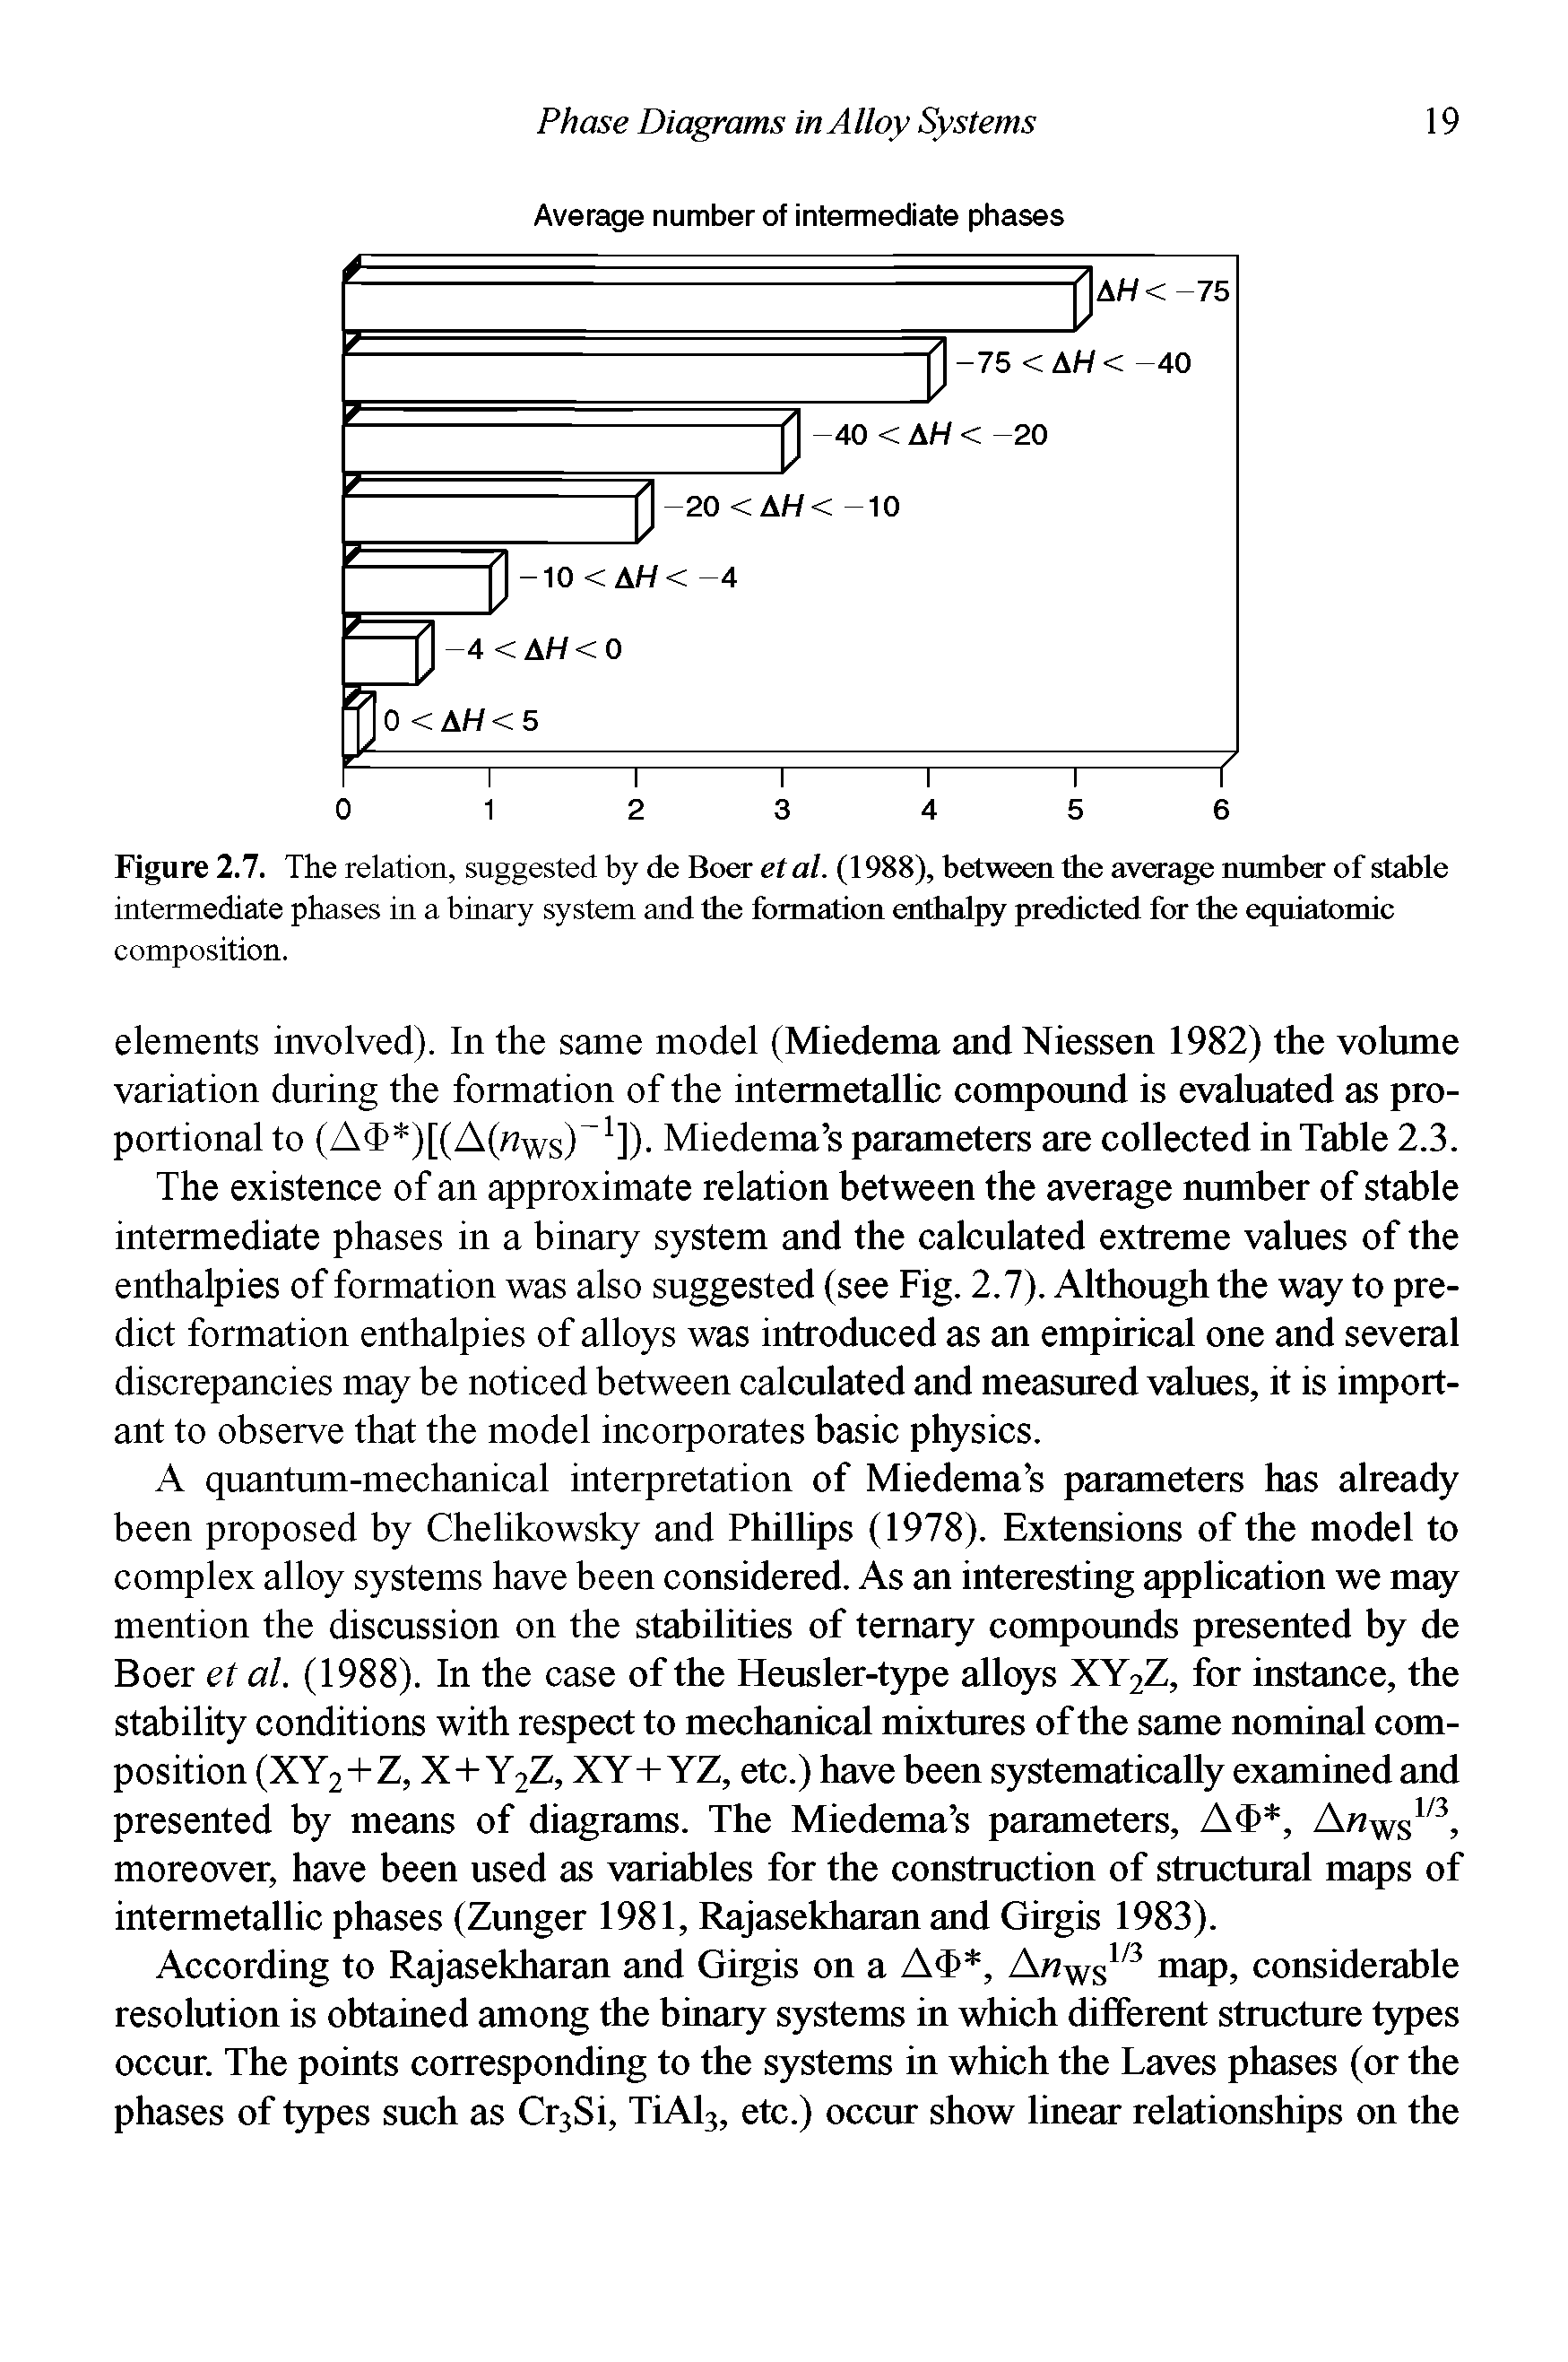 Figure 2.7. The relation, suggested by de Boer etal. (1988), between the average number of stable intermediate phases in a binary system and the formation enthalpy predicted for the equiatomic composition.